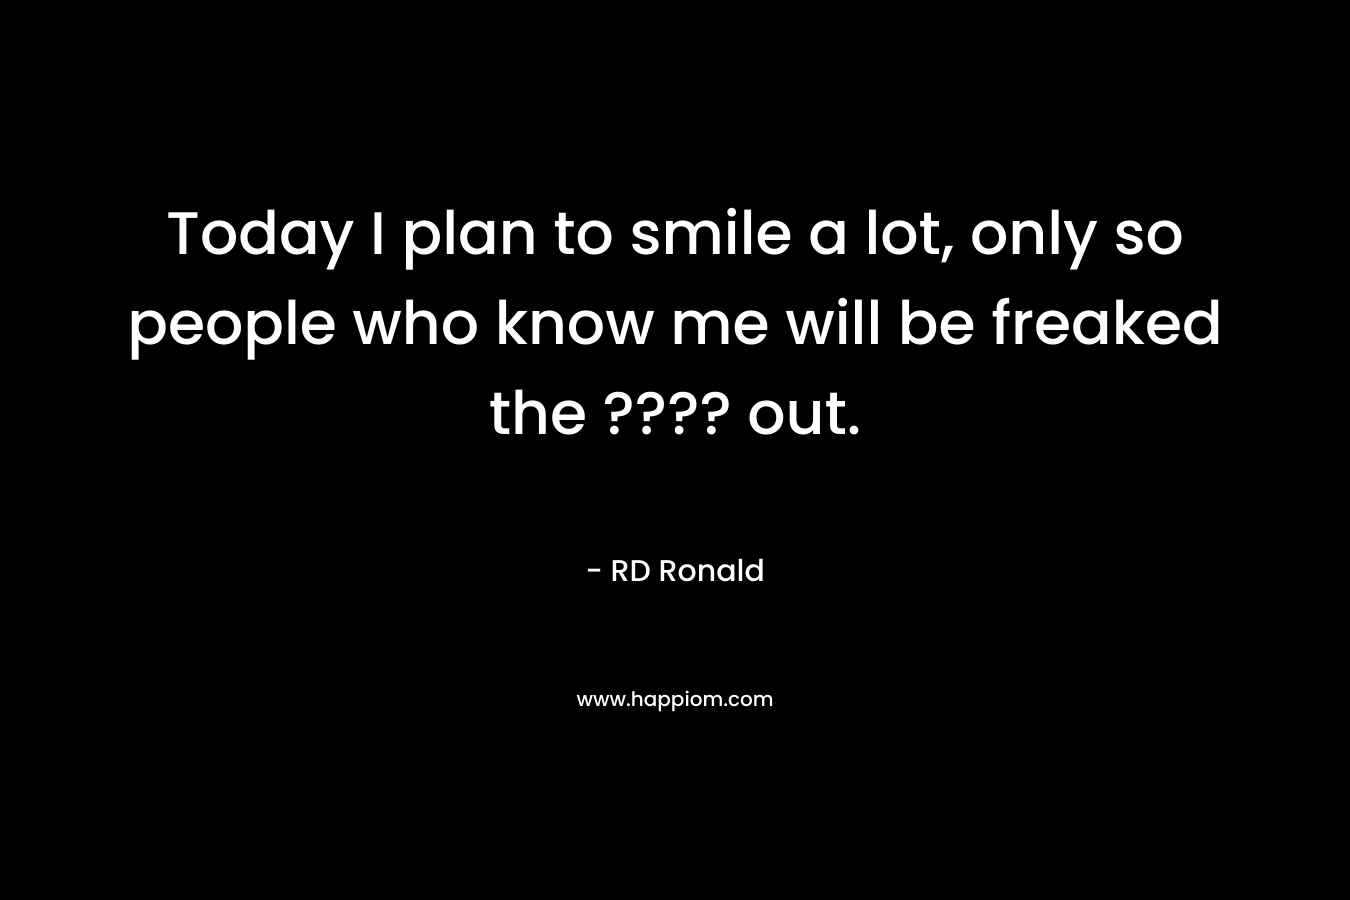 Today I plan to smile a lot, only so people who know me will be freaked the ???? out. – RD Ronald